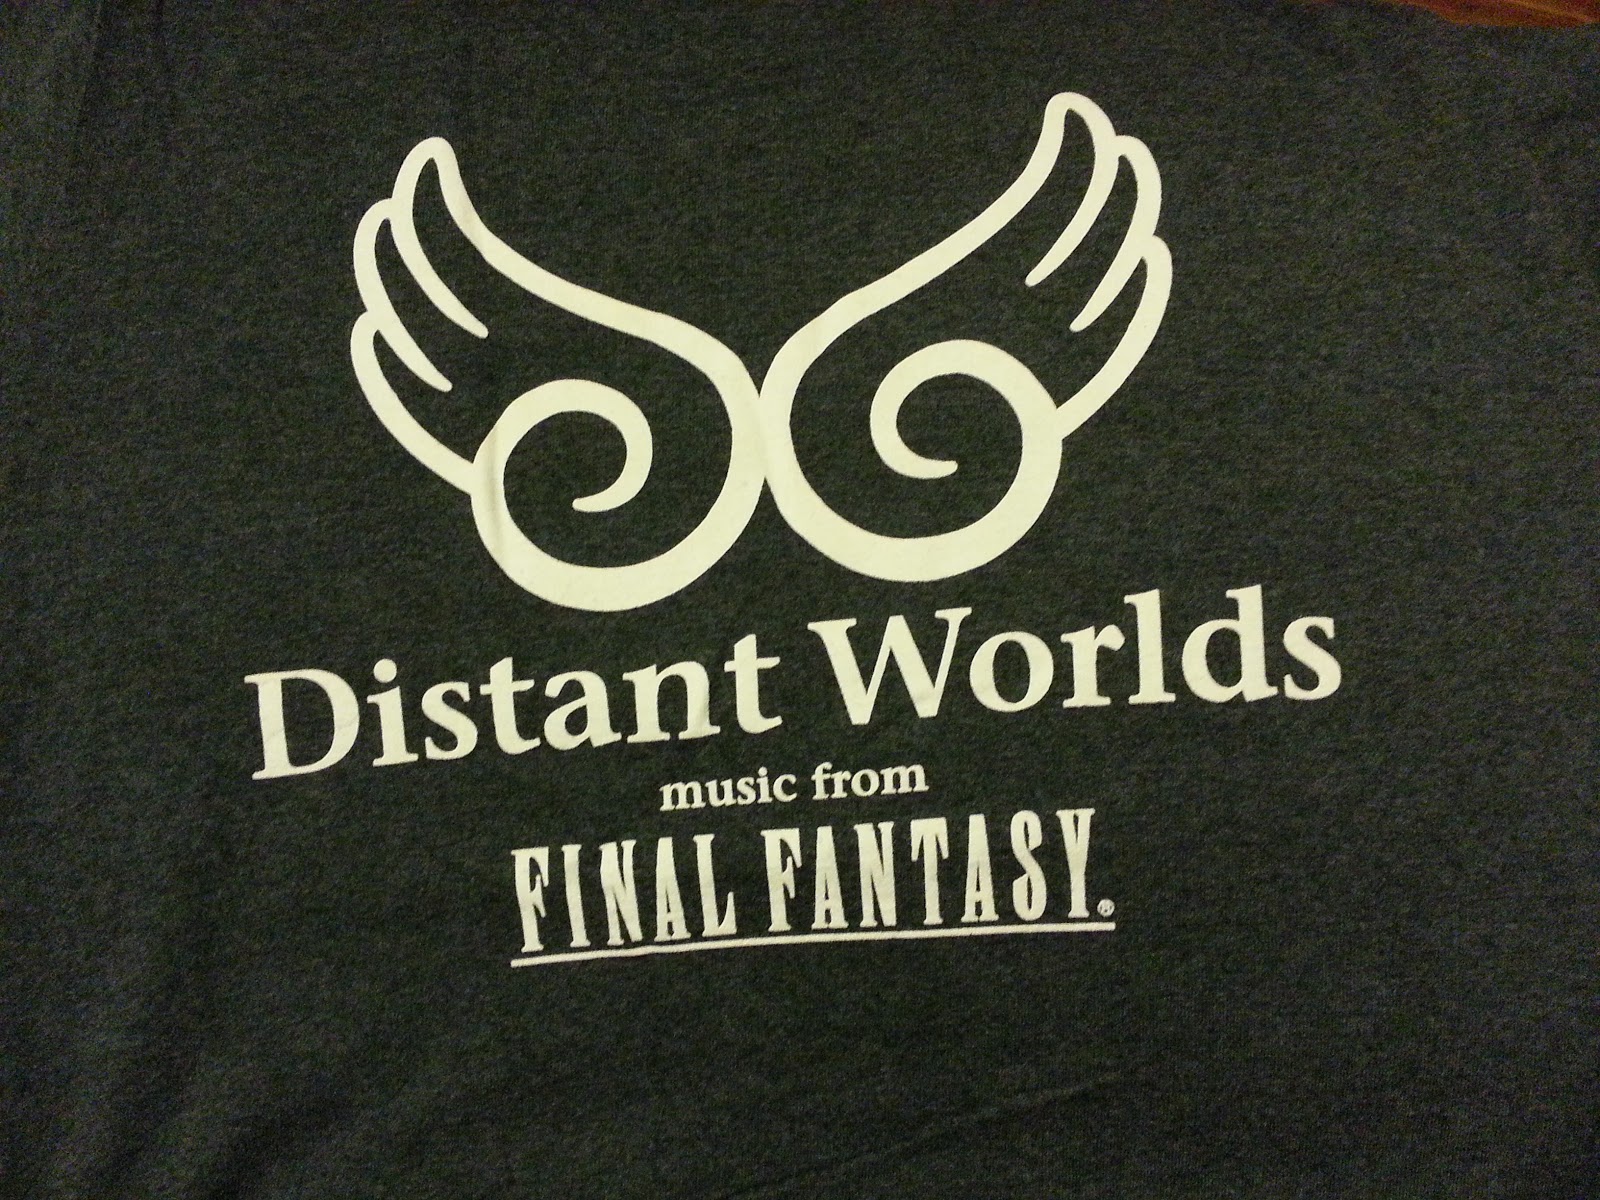 Plus a brand new Distant Worlds: Music from Final Fantasy T-shirt ...